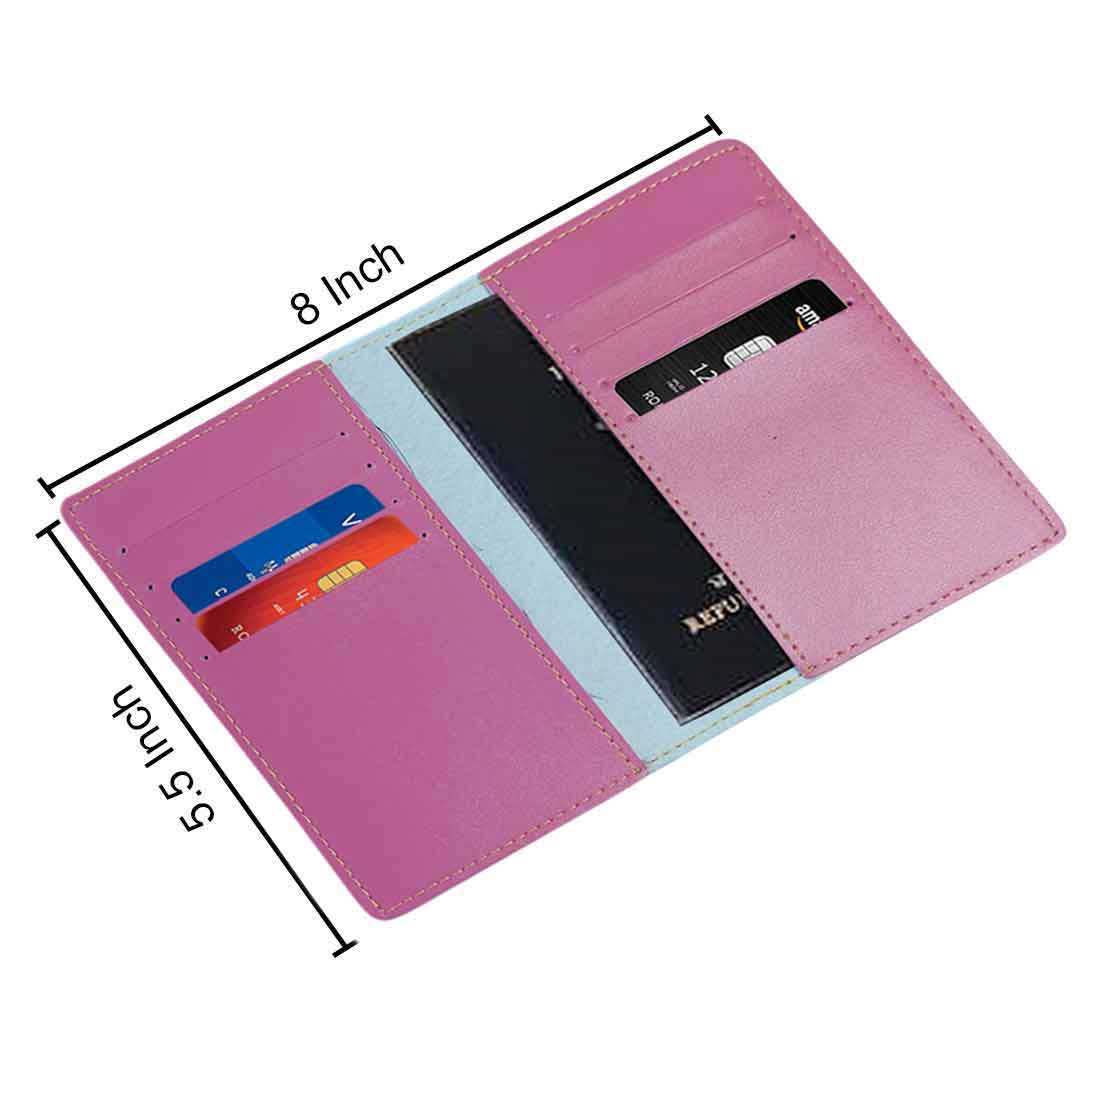 Cool Passport Holder Faux Leather Custom Covers for Passports